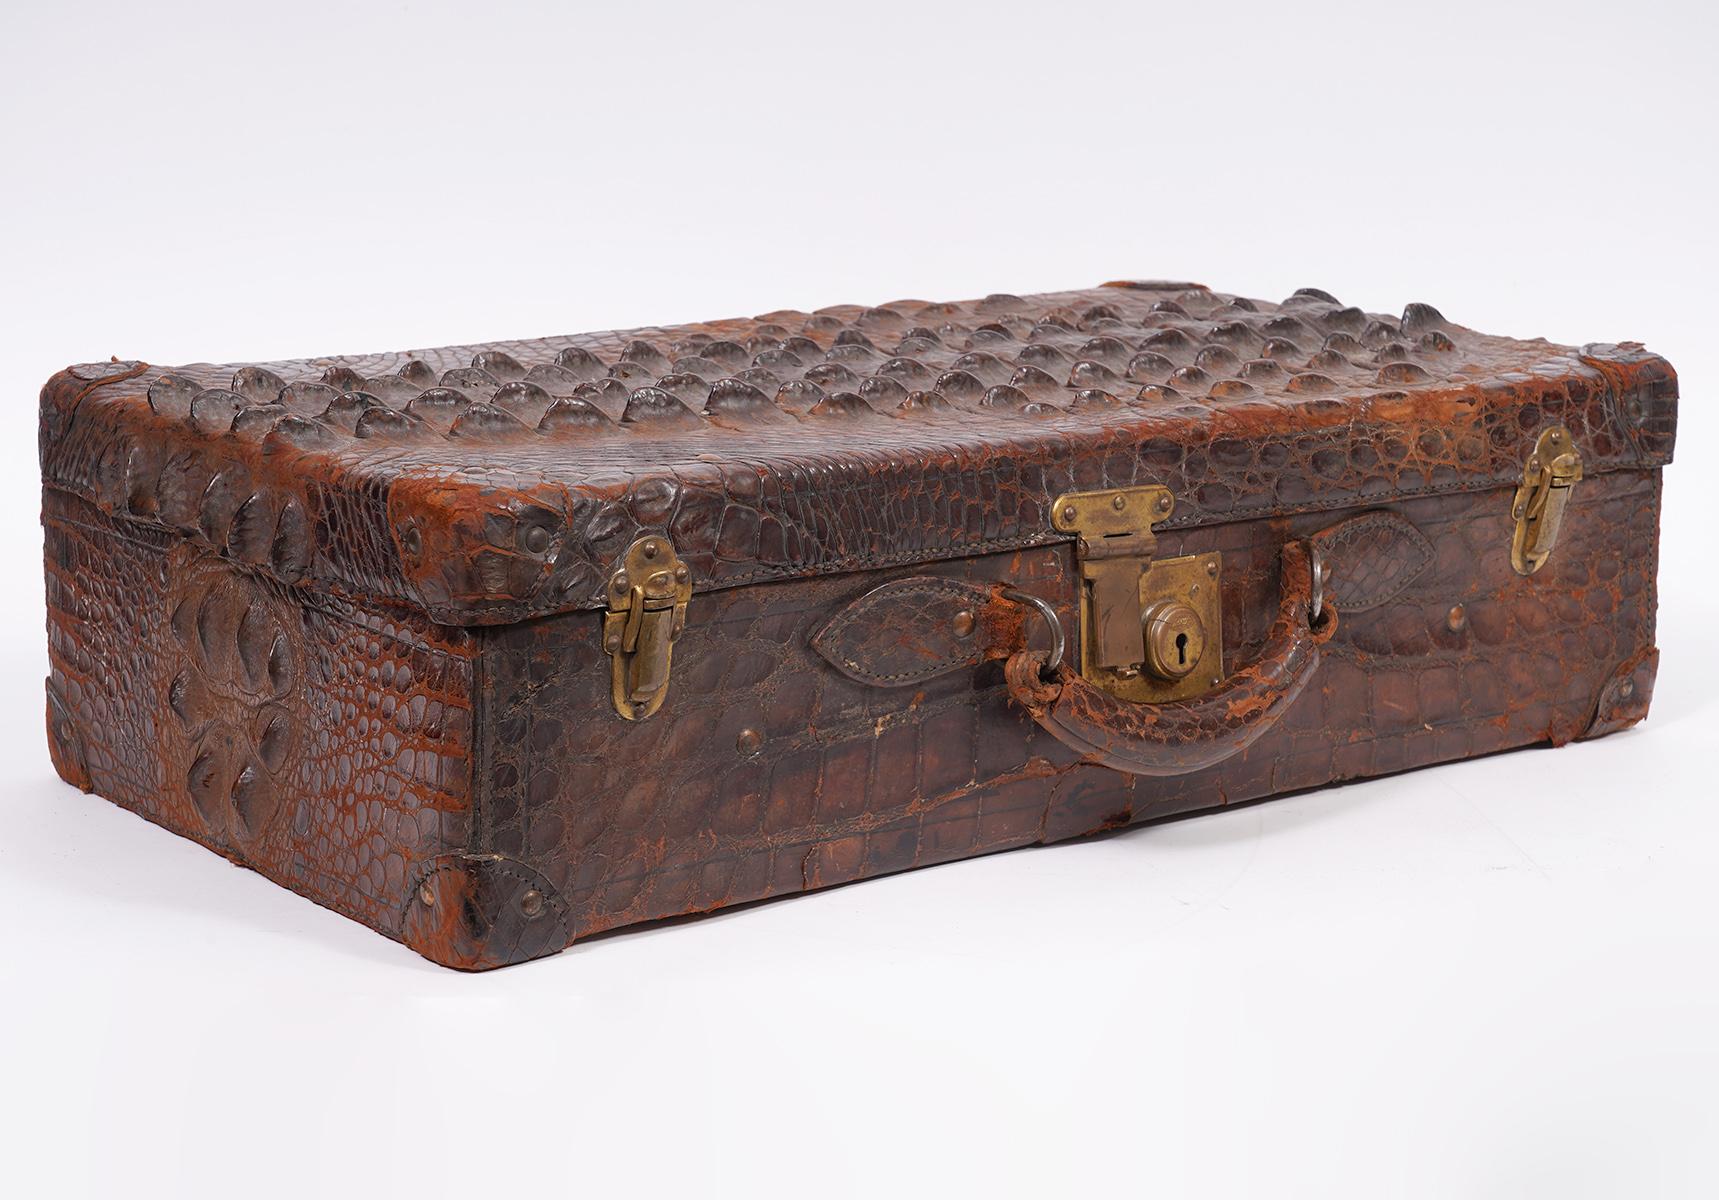 Colonial Revival Exotic Early Horn Back Alligator or Crocodile Small Suitcase or Briefcase